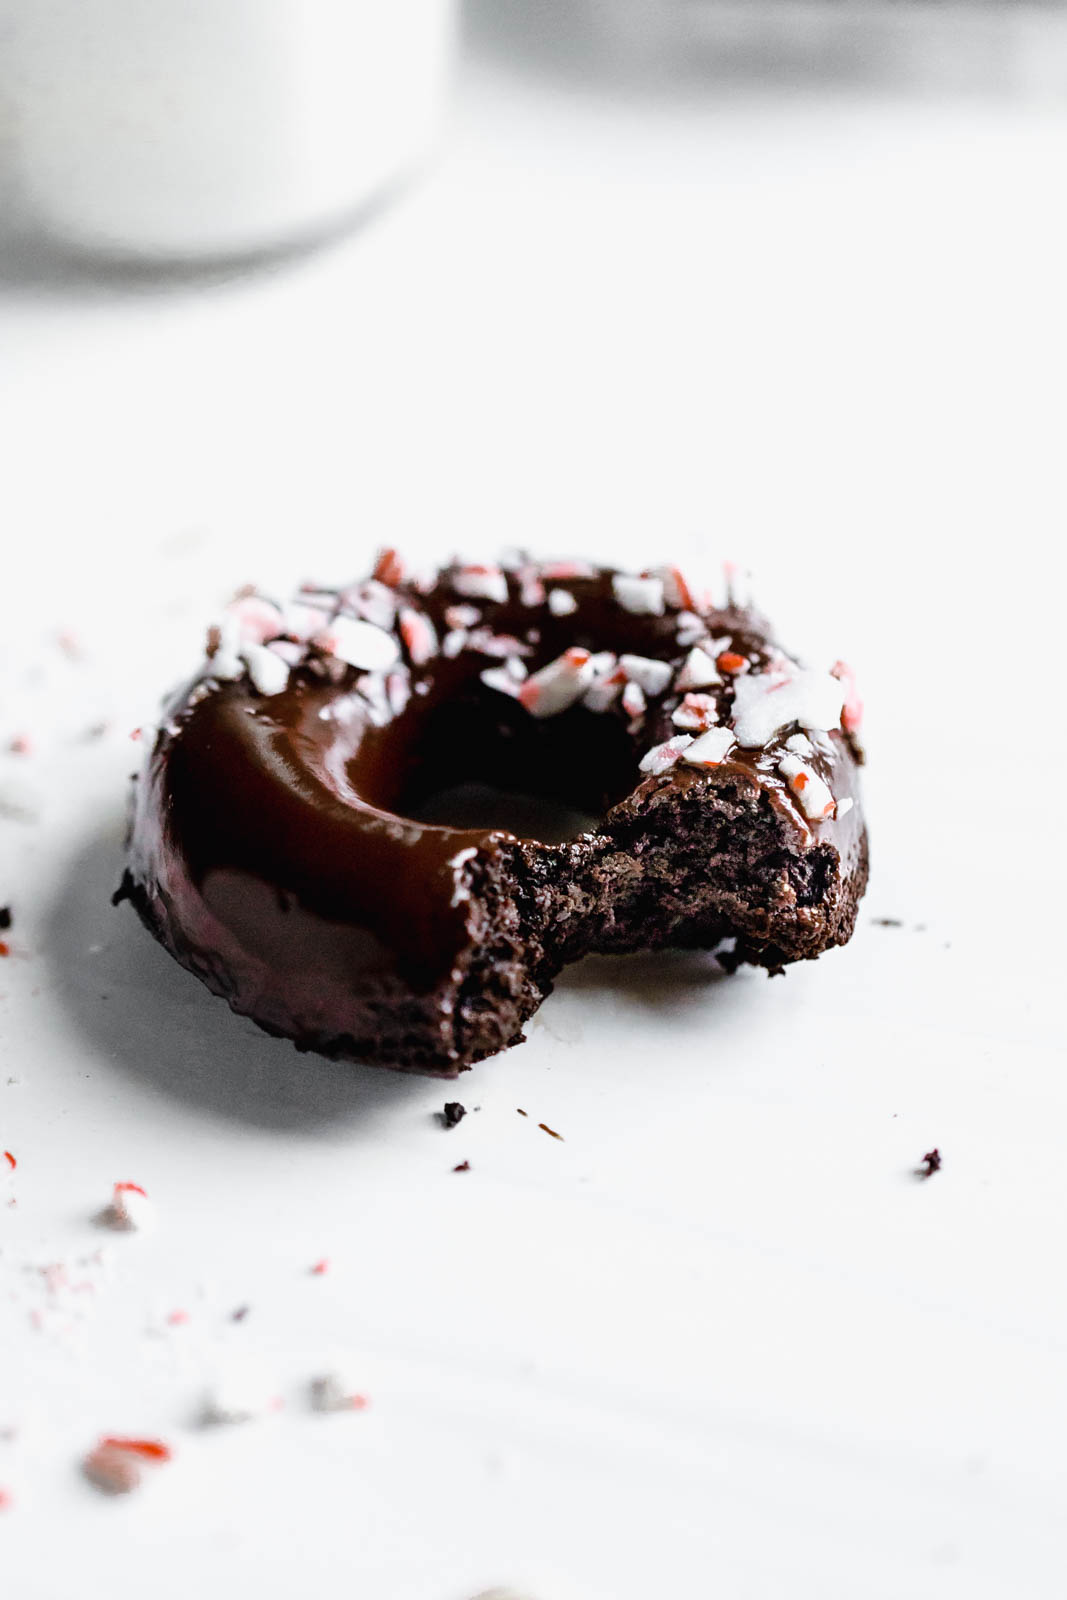 Ultra moist dairy-free and grain-free baked Peppermint Chocolate Donuts made topped with a dark chocolate ganache and candied peppermints. NOM.